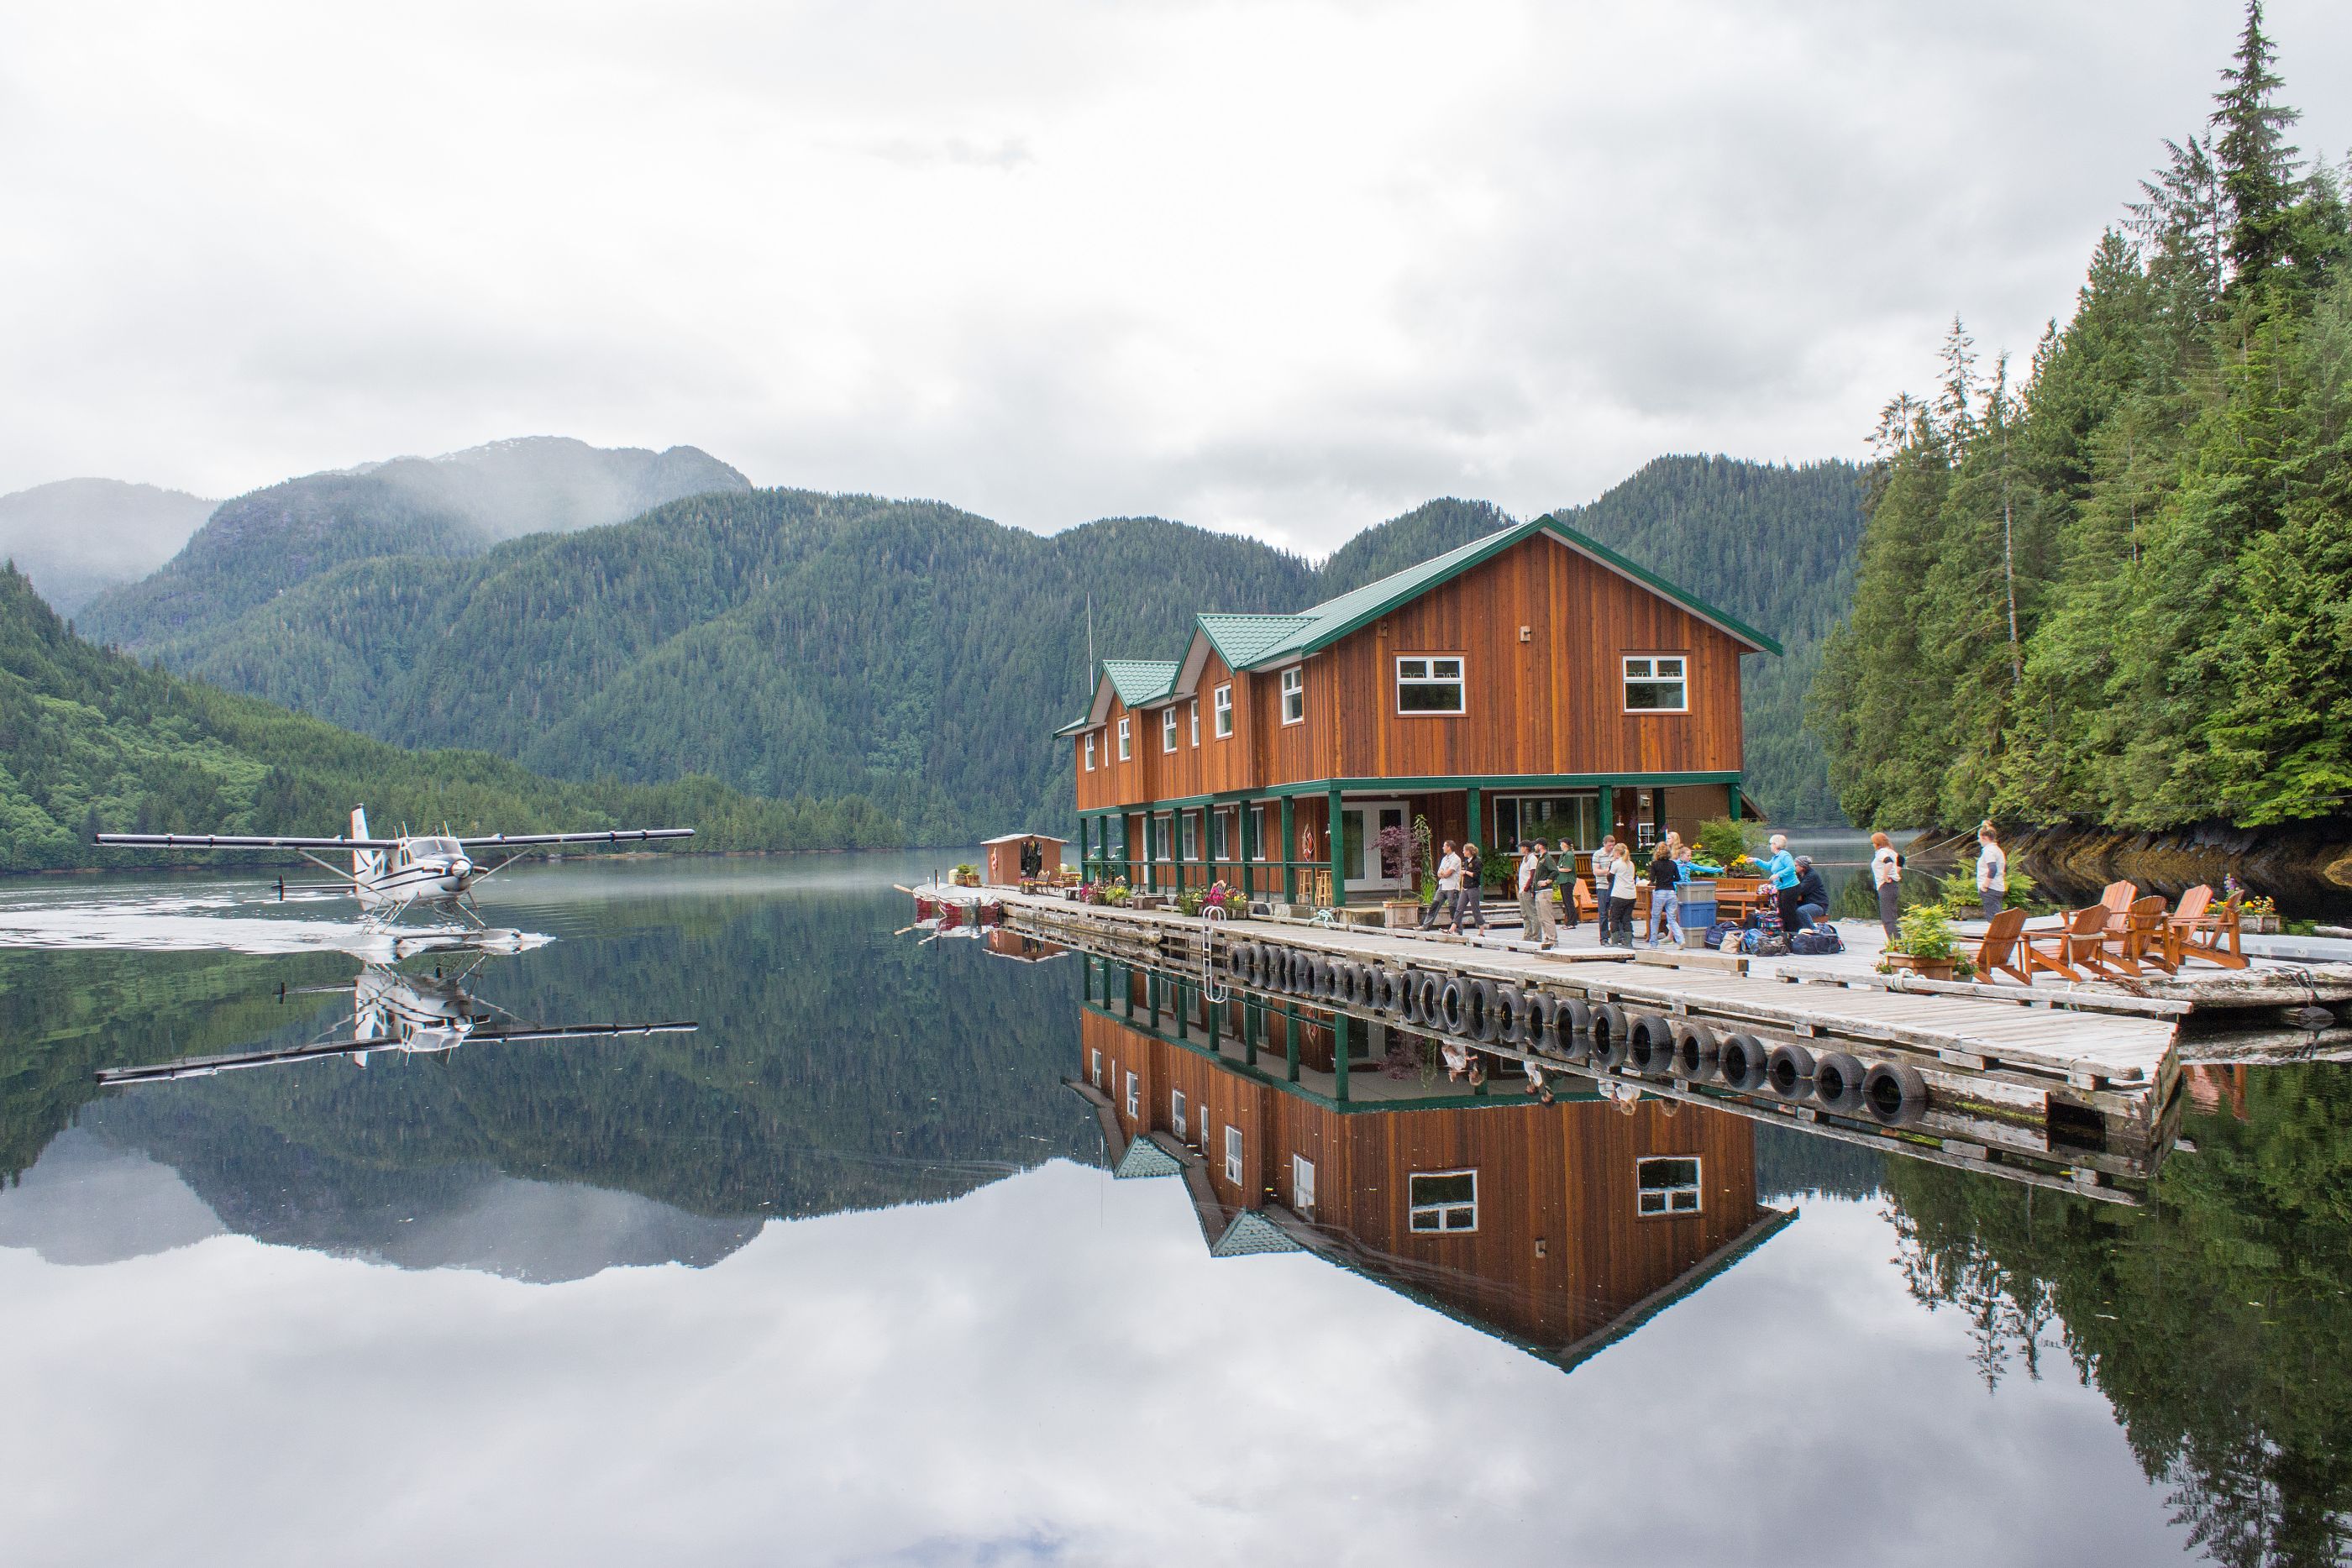 Seaplane Lodge with mountains in background reflecting in water, Great Bear Lodge, Canada